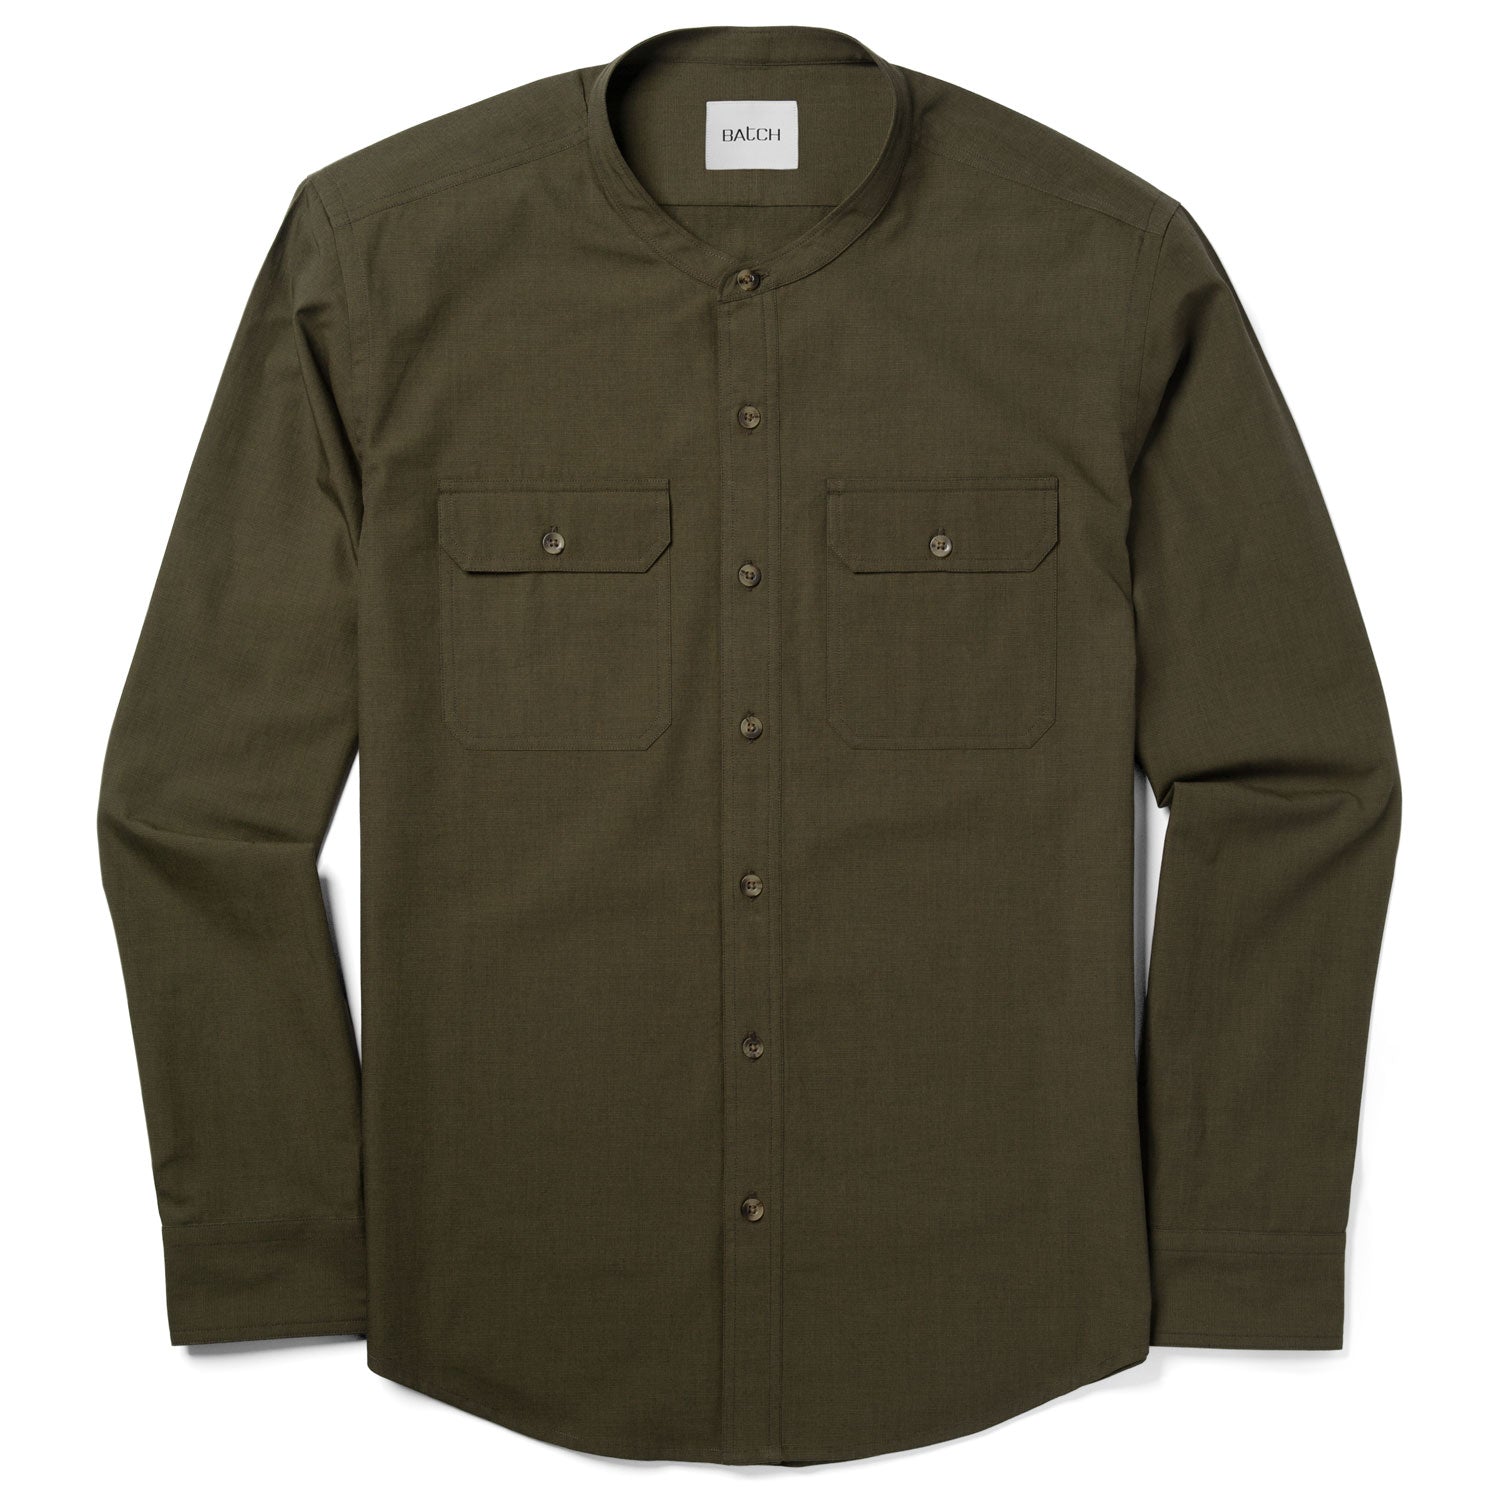 Constructor Band Collar Utility Shirt – Olive Green End-on-end